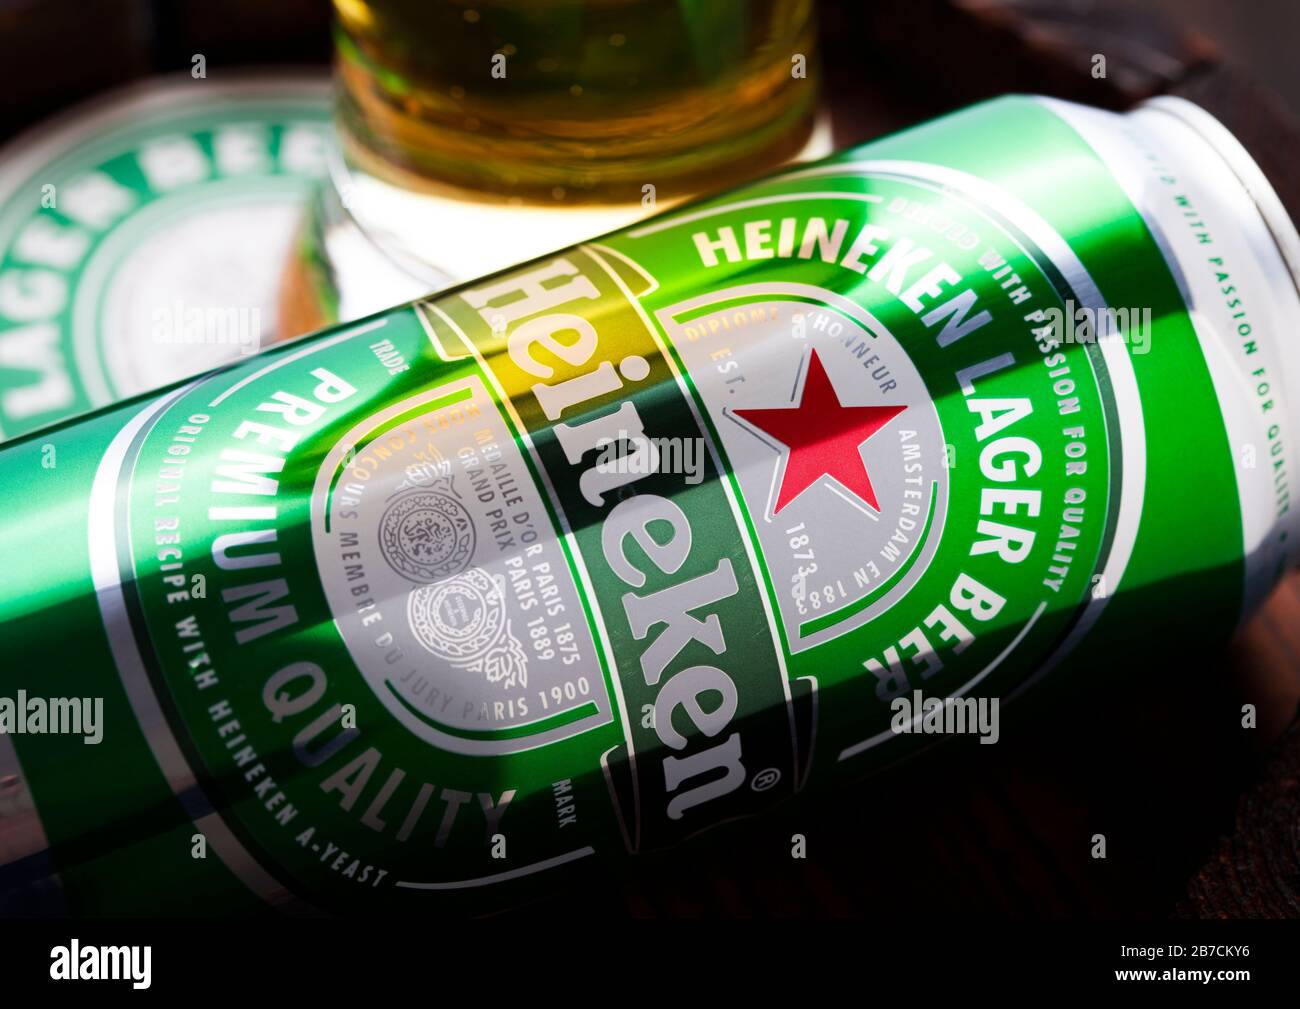 LONDON, UK - APRIL 27, 2018: Aluminium can of Heineken Lager Beer on top of old wooden barrel with coaster and glass. Heineken is the flagship product Stock Photo